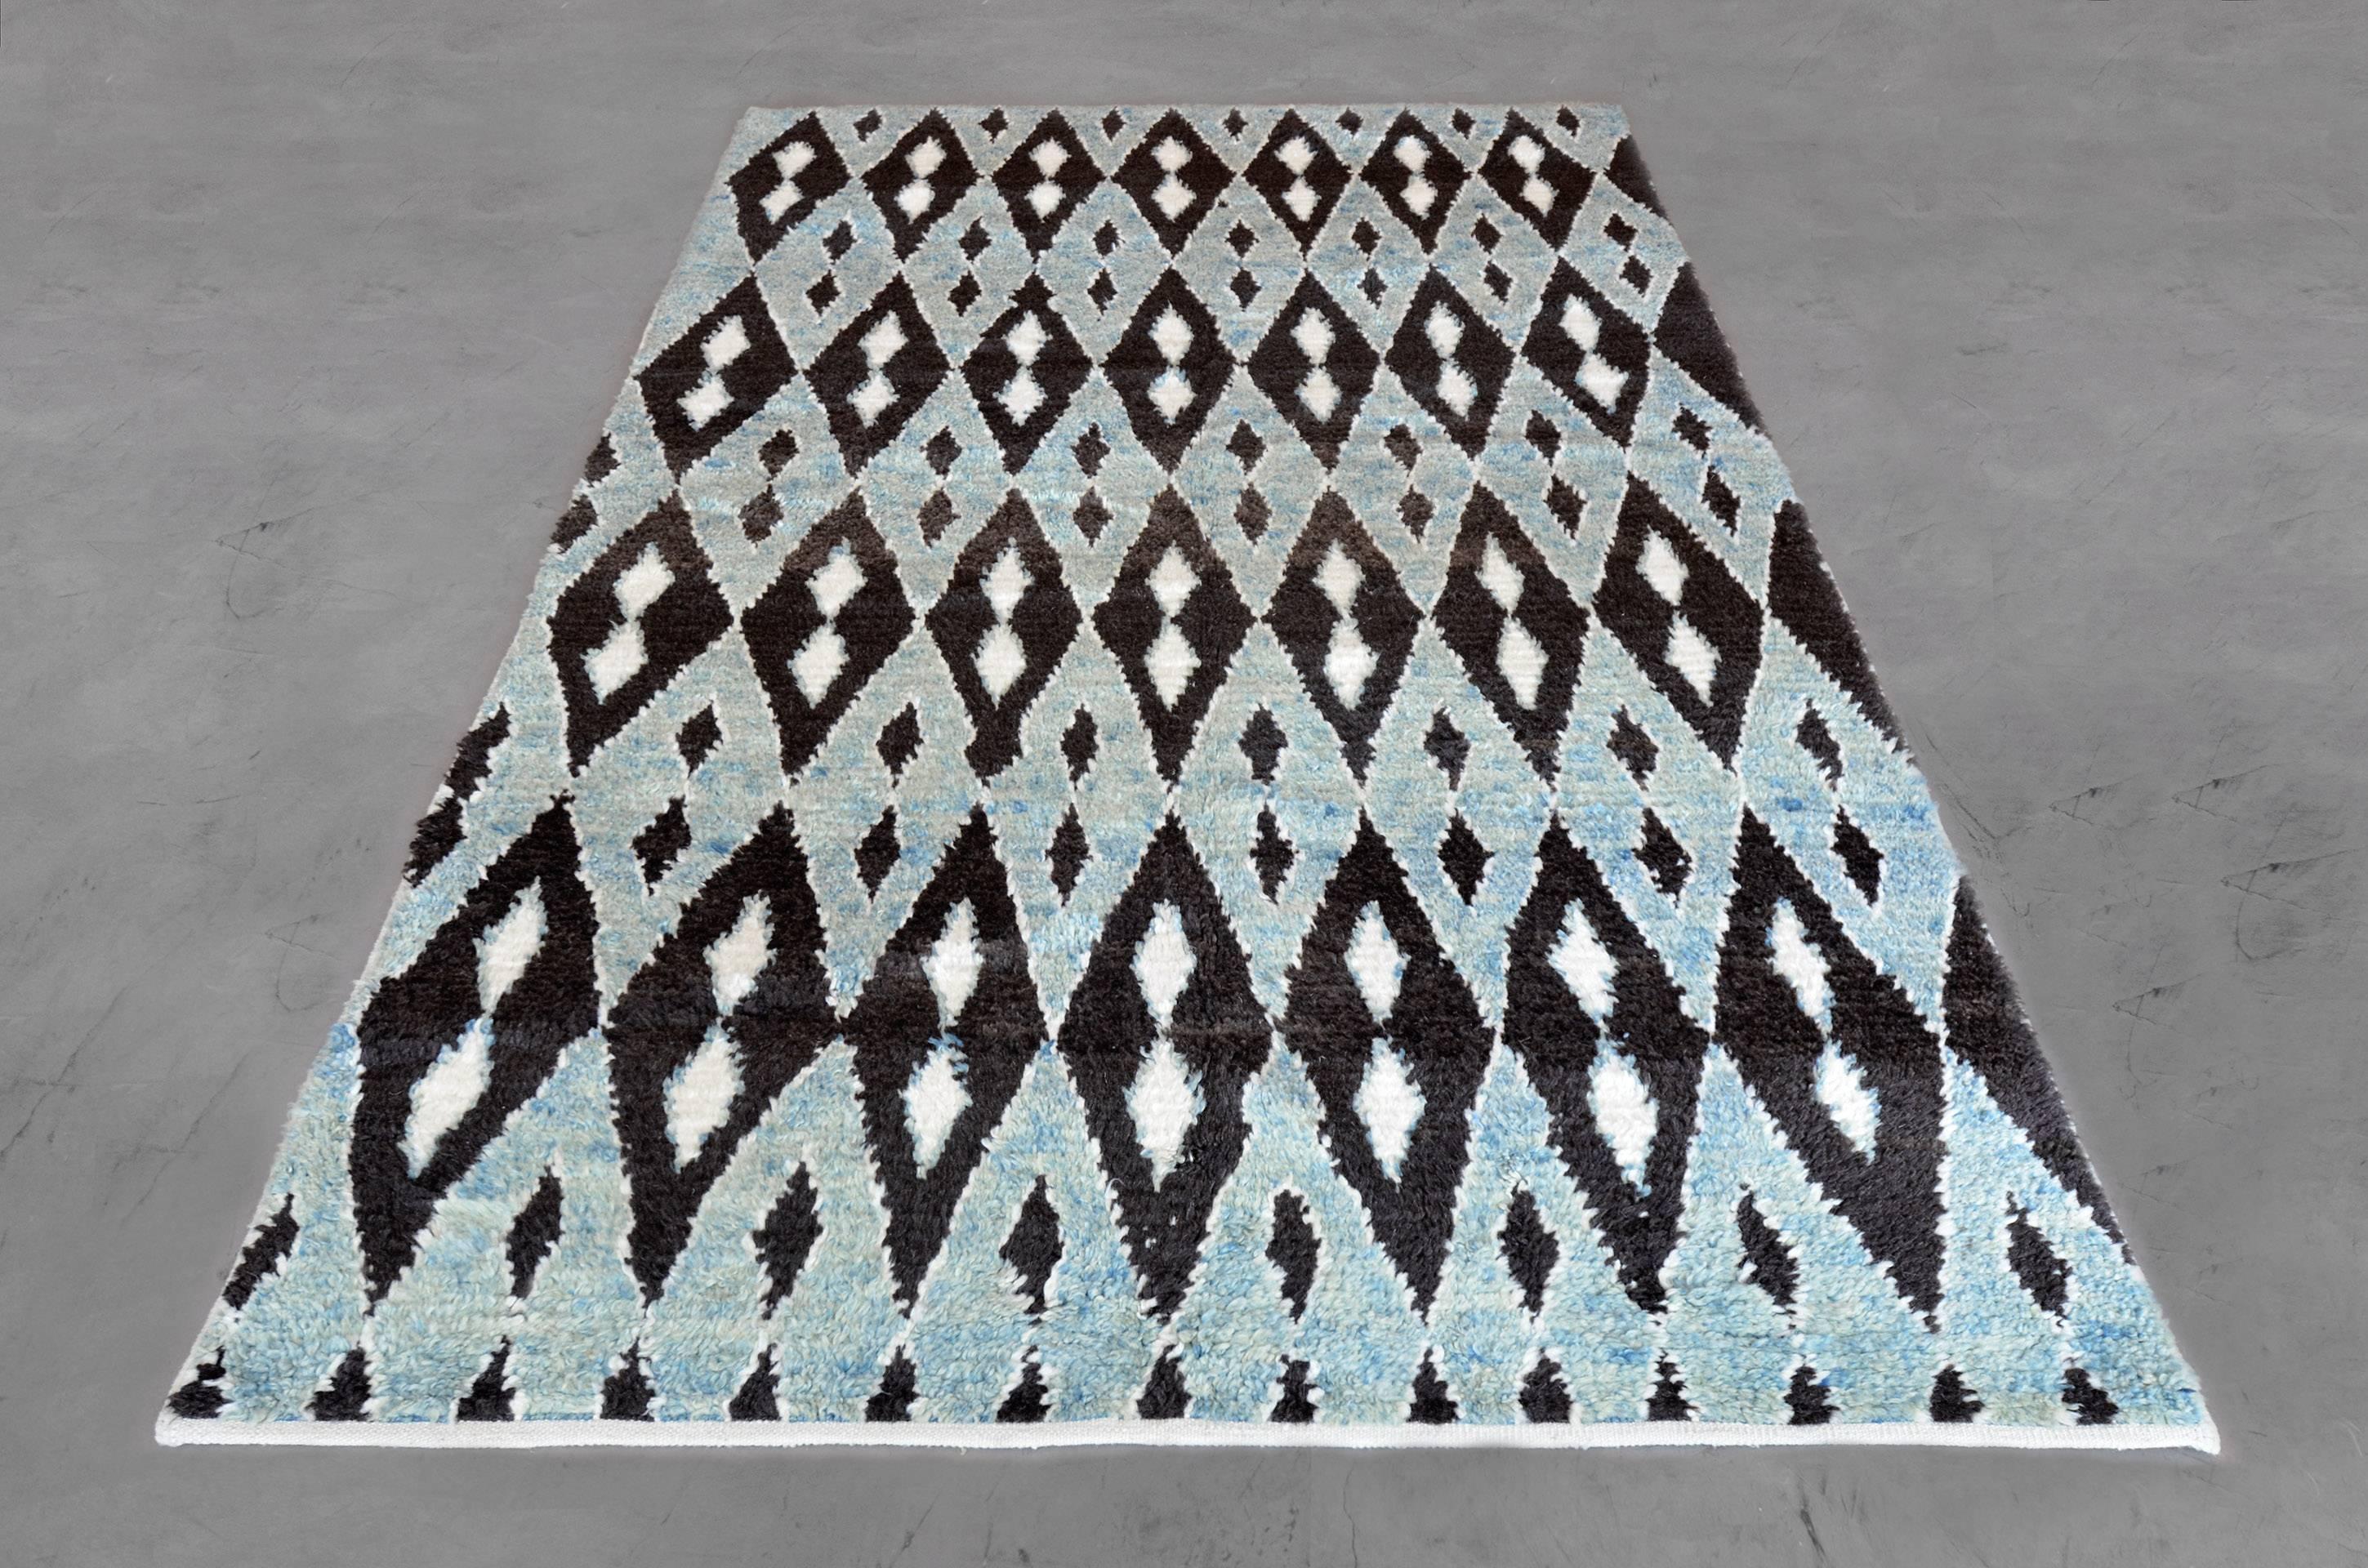 This deco-inspired rug gives a youthful and whimsical feel with its geometric design scheme. This hand-knotted Turkish rug has a neutral color composition with an all-over repeated diamond pattern. Sized at 5’10” x 9’3” this piece adds character and